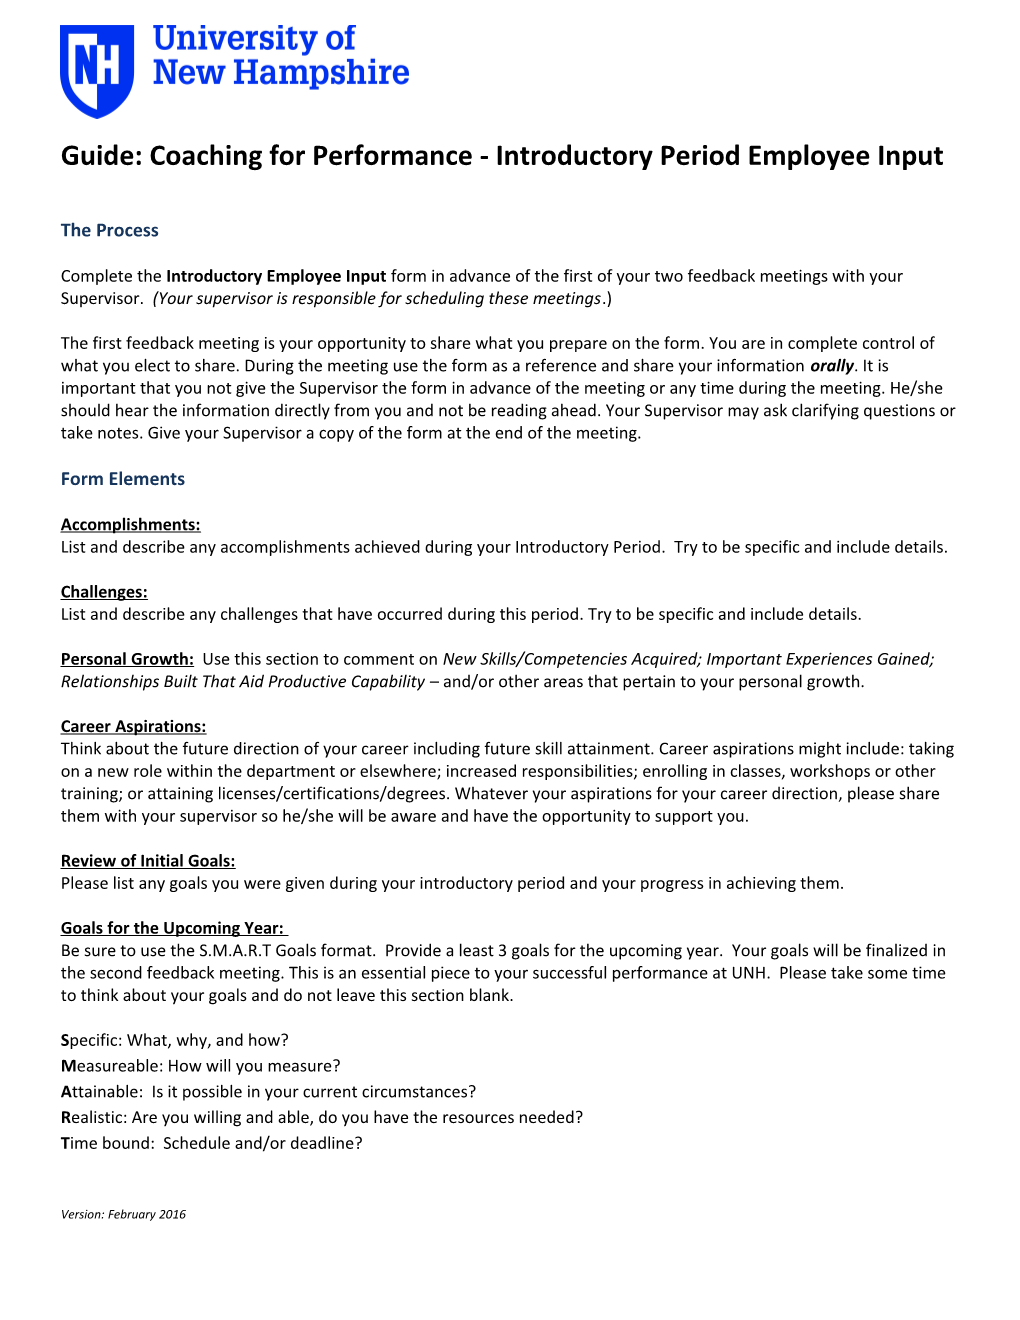 Guide: Coaching for Performance - Introductory Period Employee Input